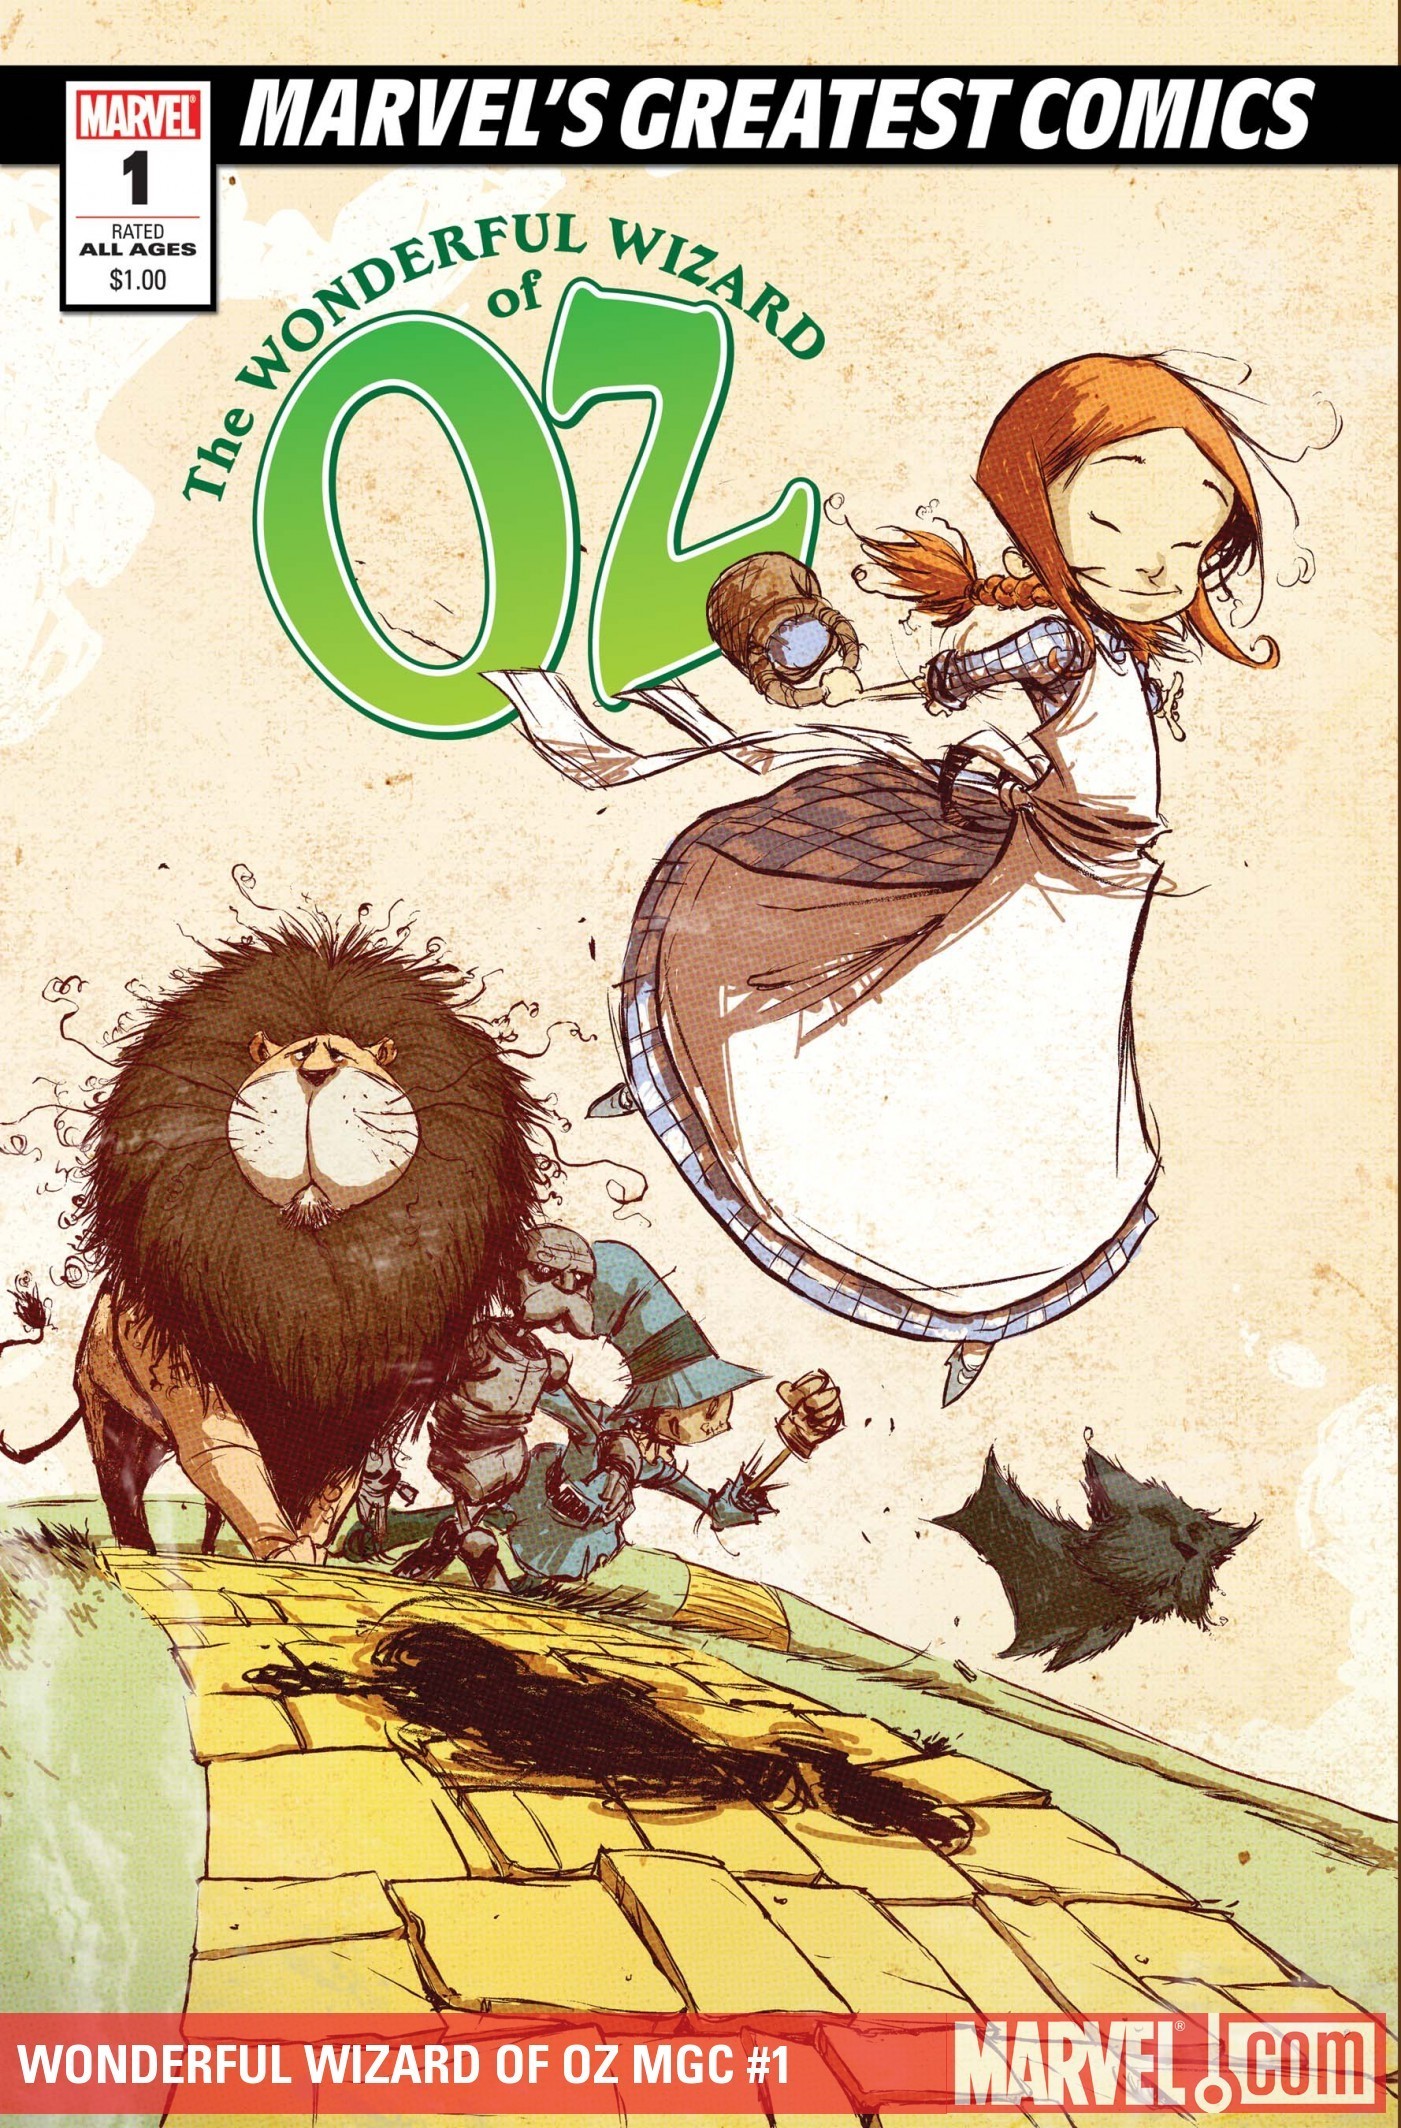 MARVEL-s-The-Wonderful-Wizard-of-Oz-the-